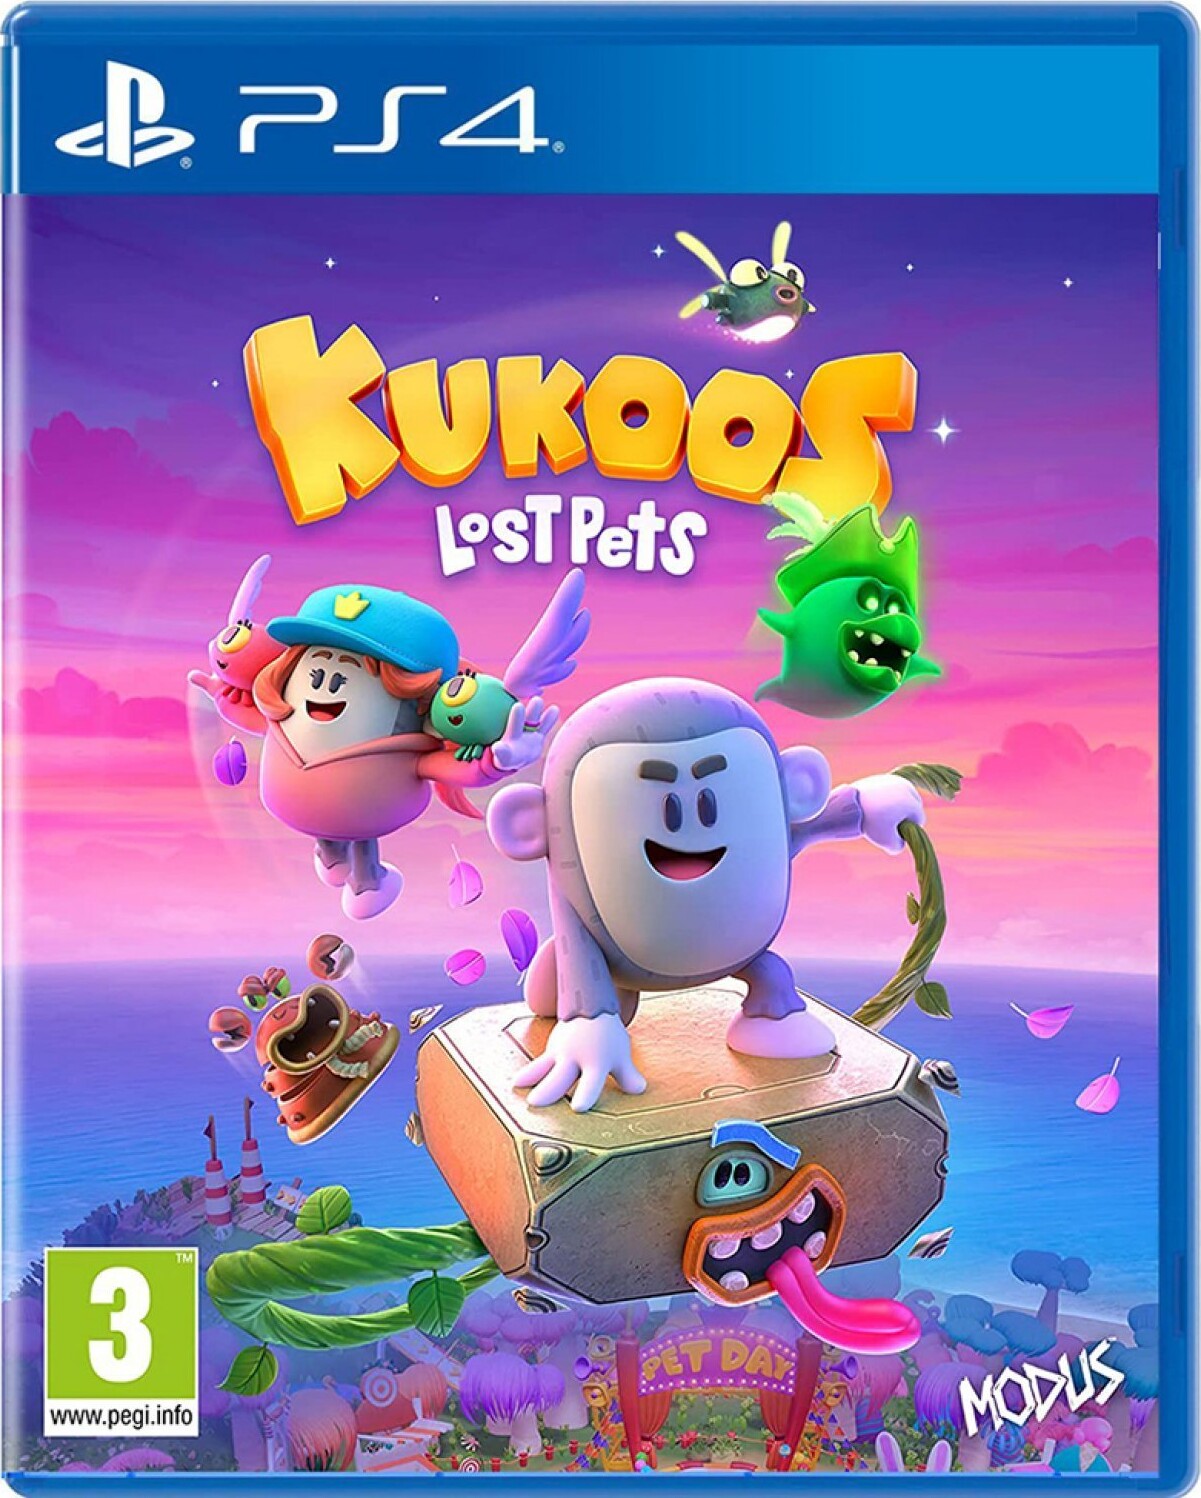 Kukoos - Lost Pets - PS4